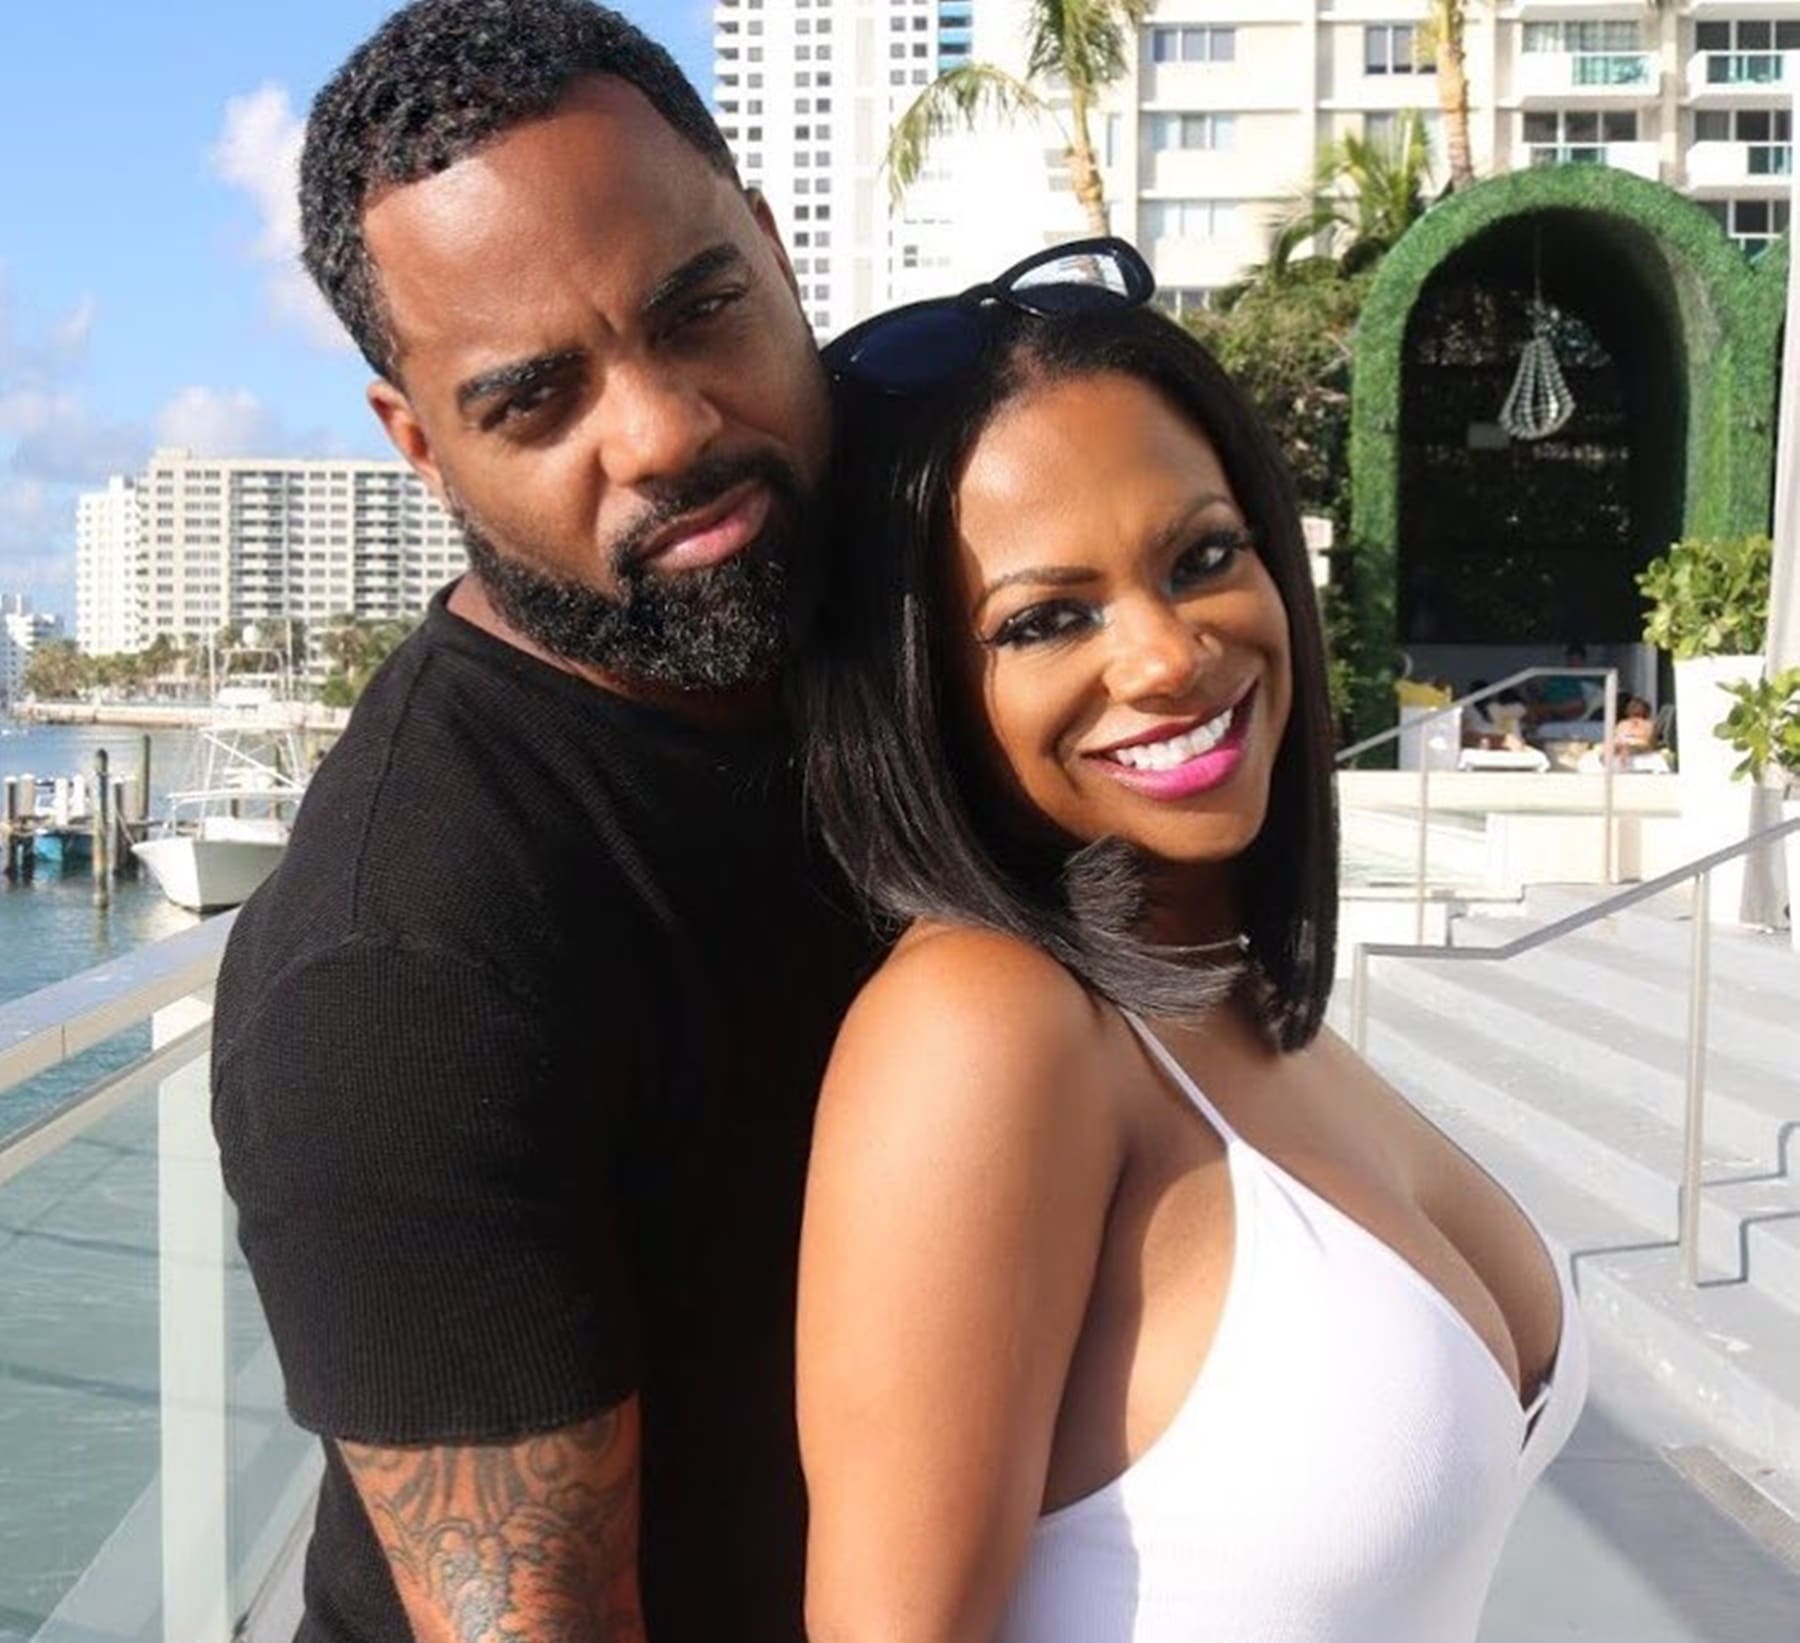 Kandi Burruss Shares A Photo Featuring The Surrogate Mother Who Had Her Baby